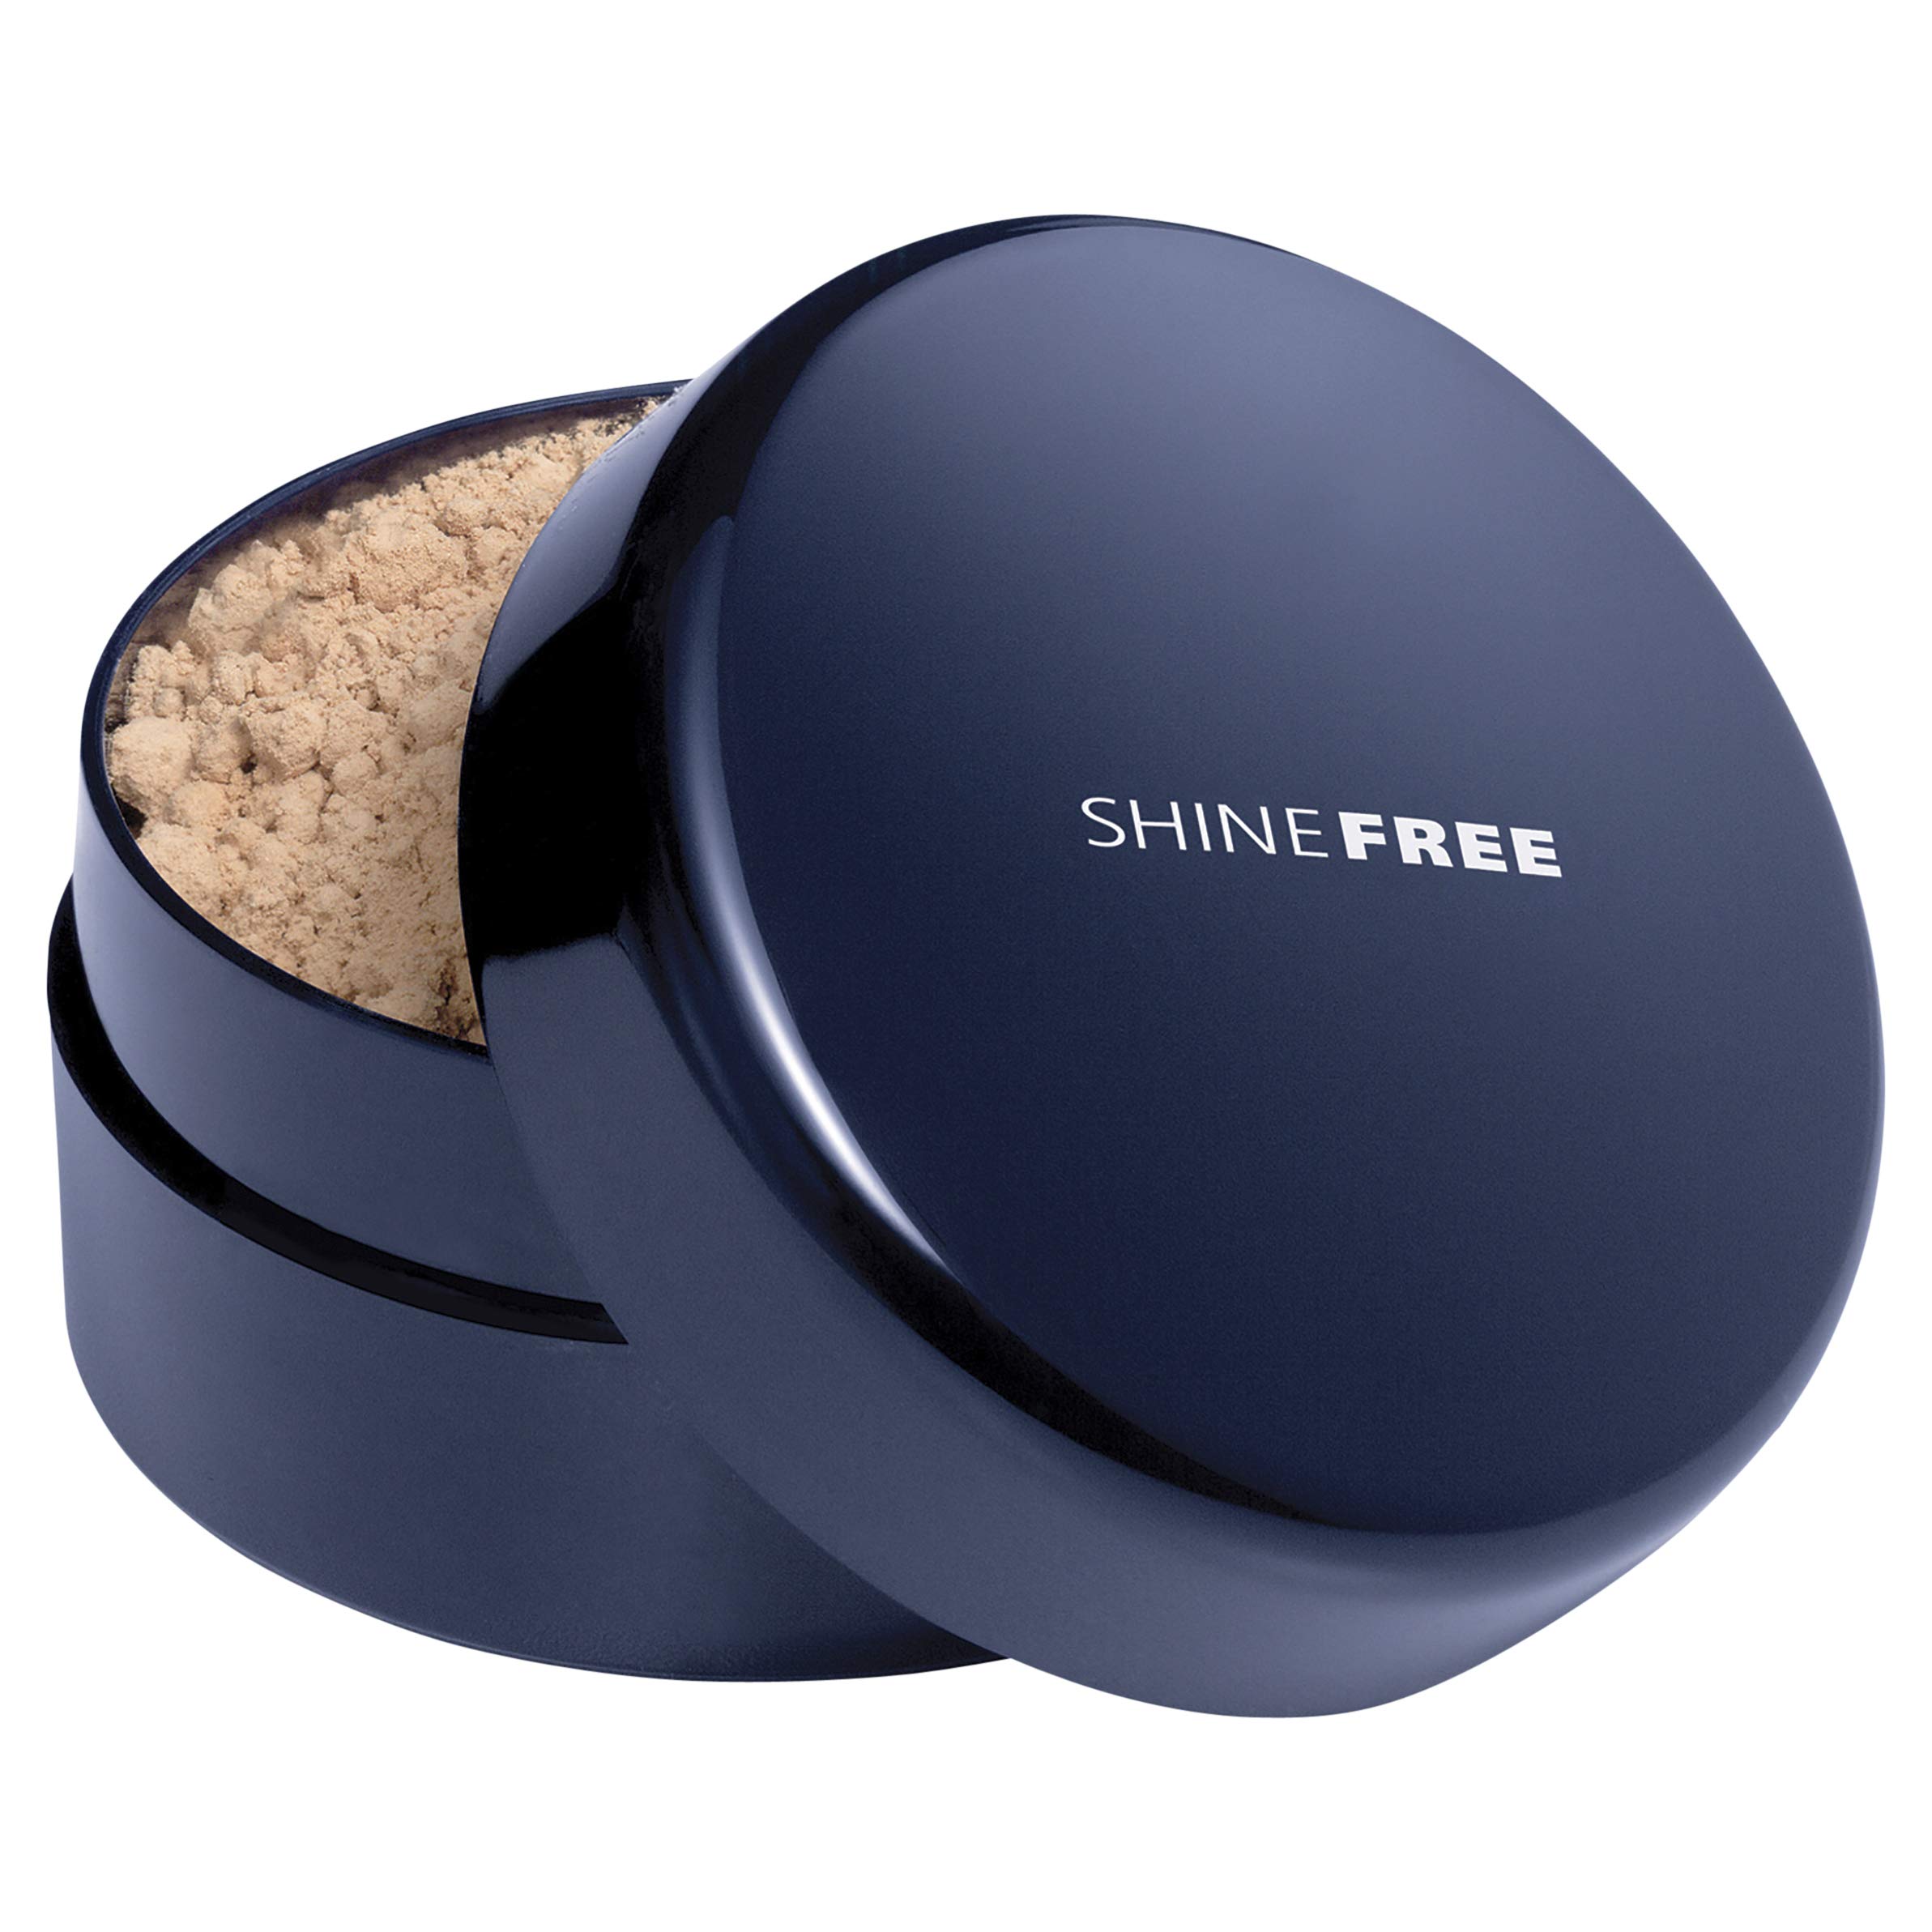 Maybelline New York Shine Free Oil-Control Loose Powder, Light; Advanced 100% Oil-free Formula Glides on Evenly and Controls Shine (0.7 ounces)